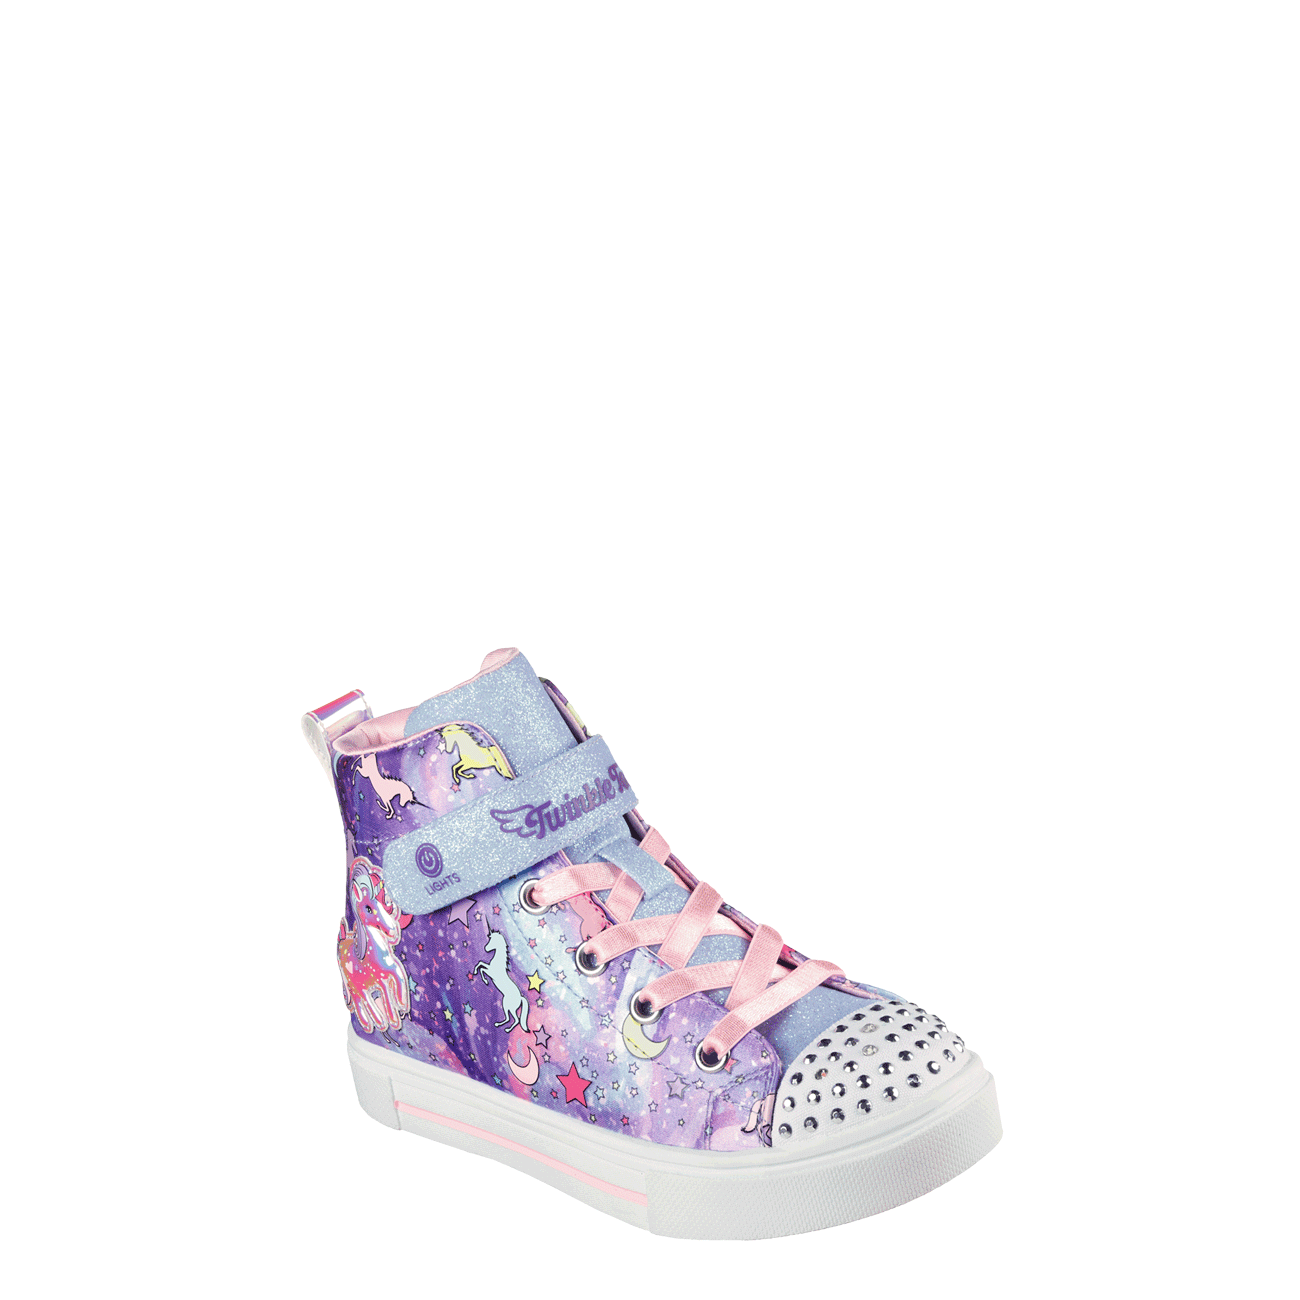 geeuwen Voorzitter Ingang Skechers Youth Girls' Twinkle Toes Twinkle Sparks Unicorn Daydream Sneaker  | The Shoe Company